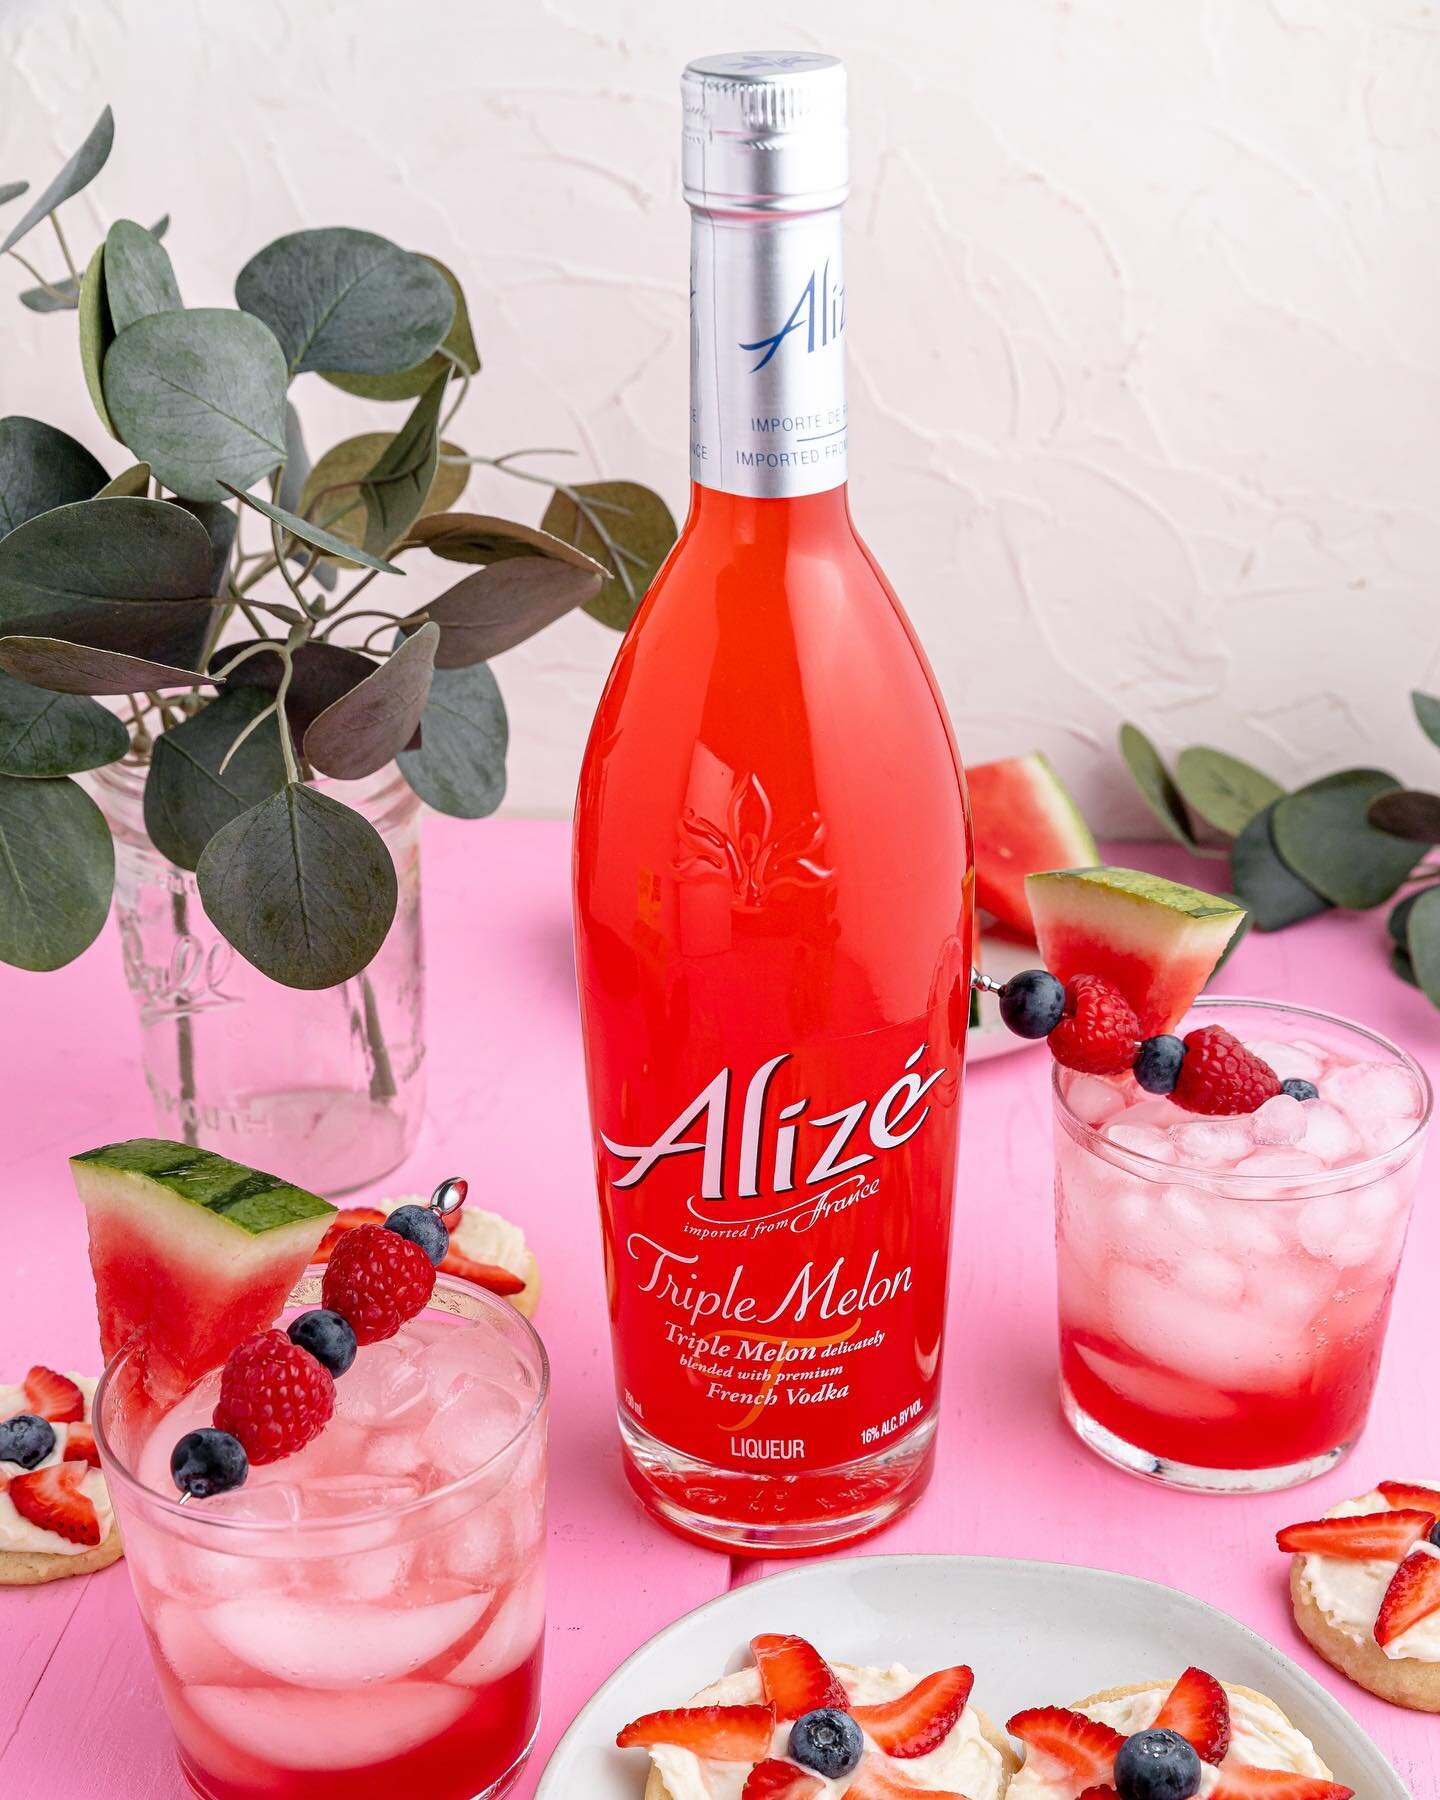 Triple the Melon, triple the happy hour fun. Cheers to a refreshing weekend with Aliz&eacute;!